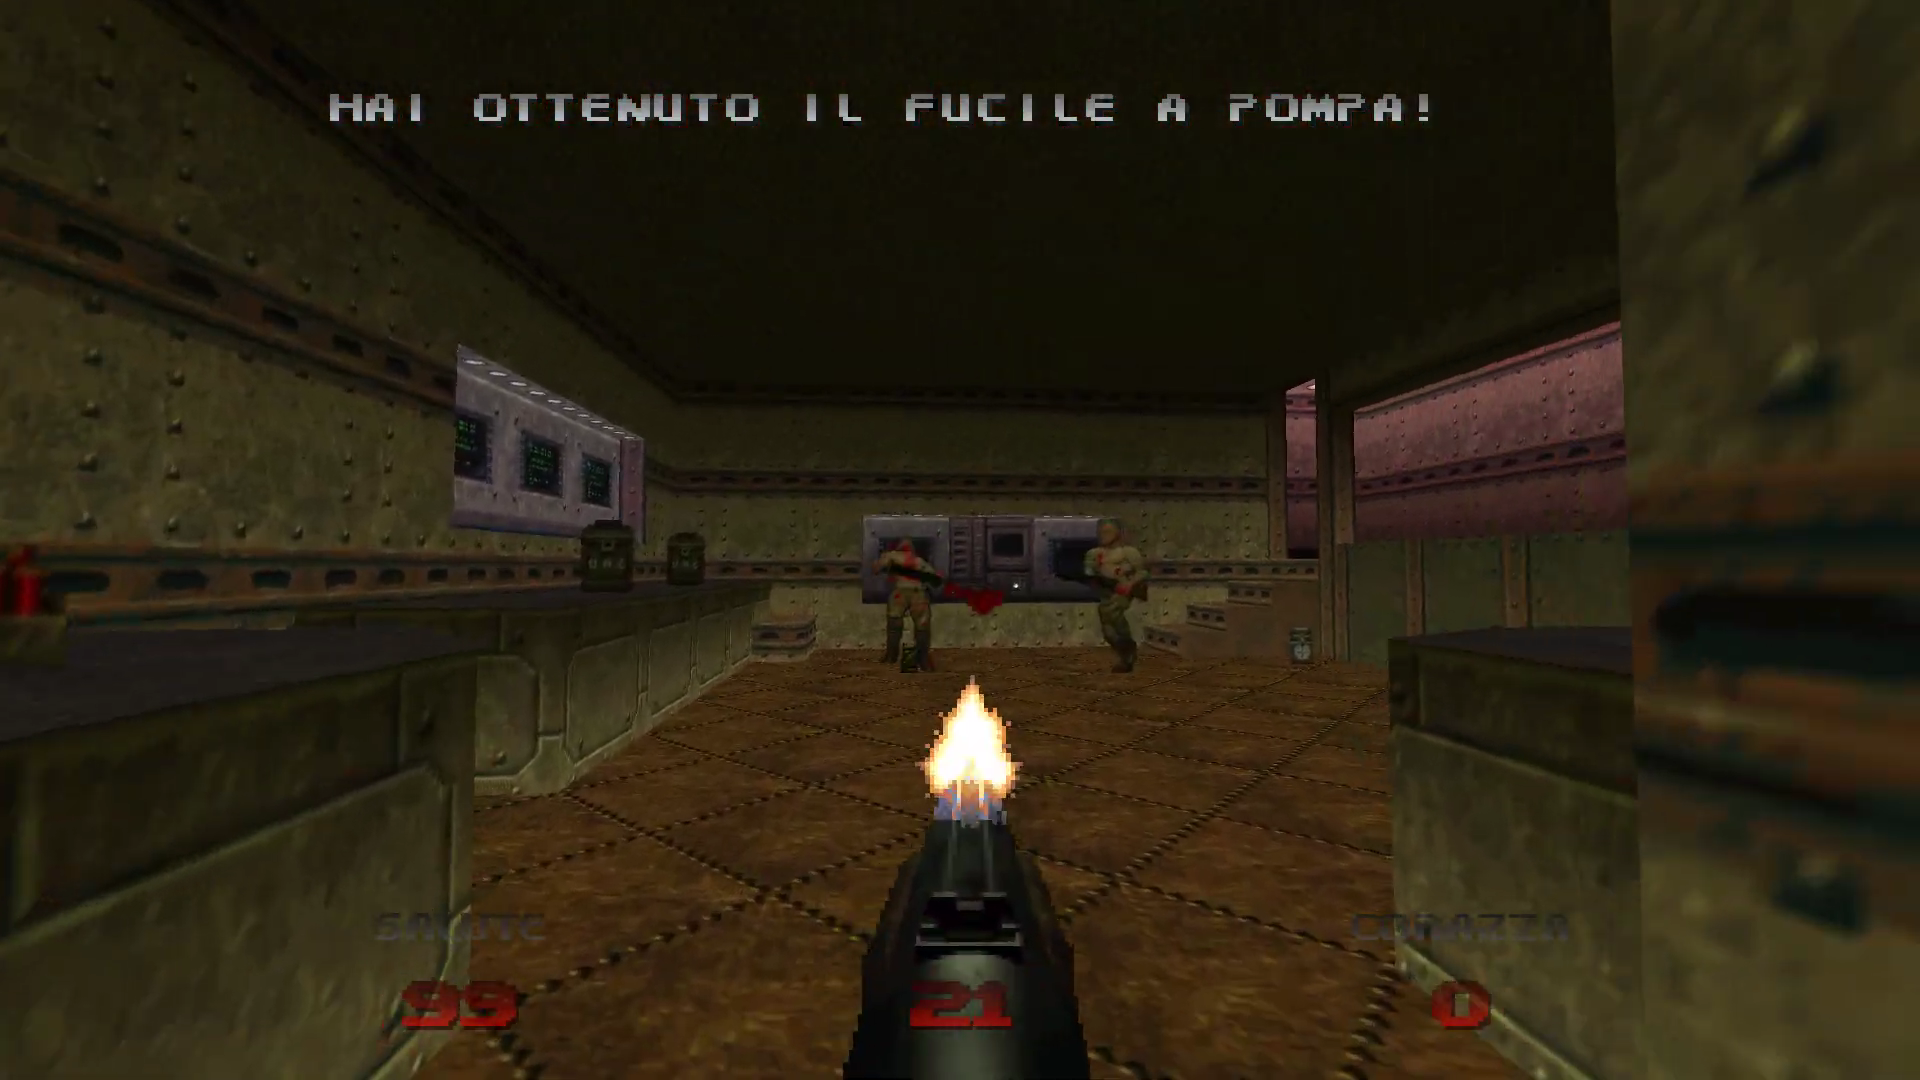 Media asset in full size related to 3dfxzone.it news item entitled as follows: YouTube Gaming | Doom 64 PC Gameplay | Let's complet Staging Area Map | Image Name: news33577_Doom-64-PC-Edition-Screenshot_2.png